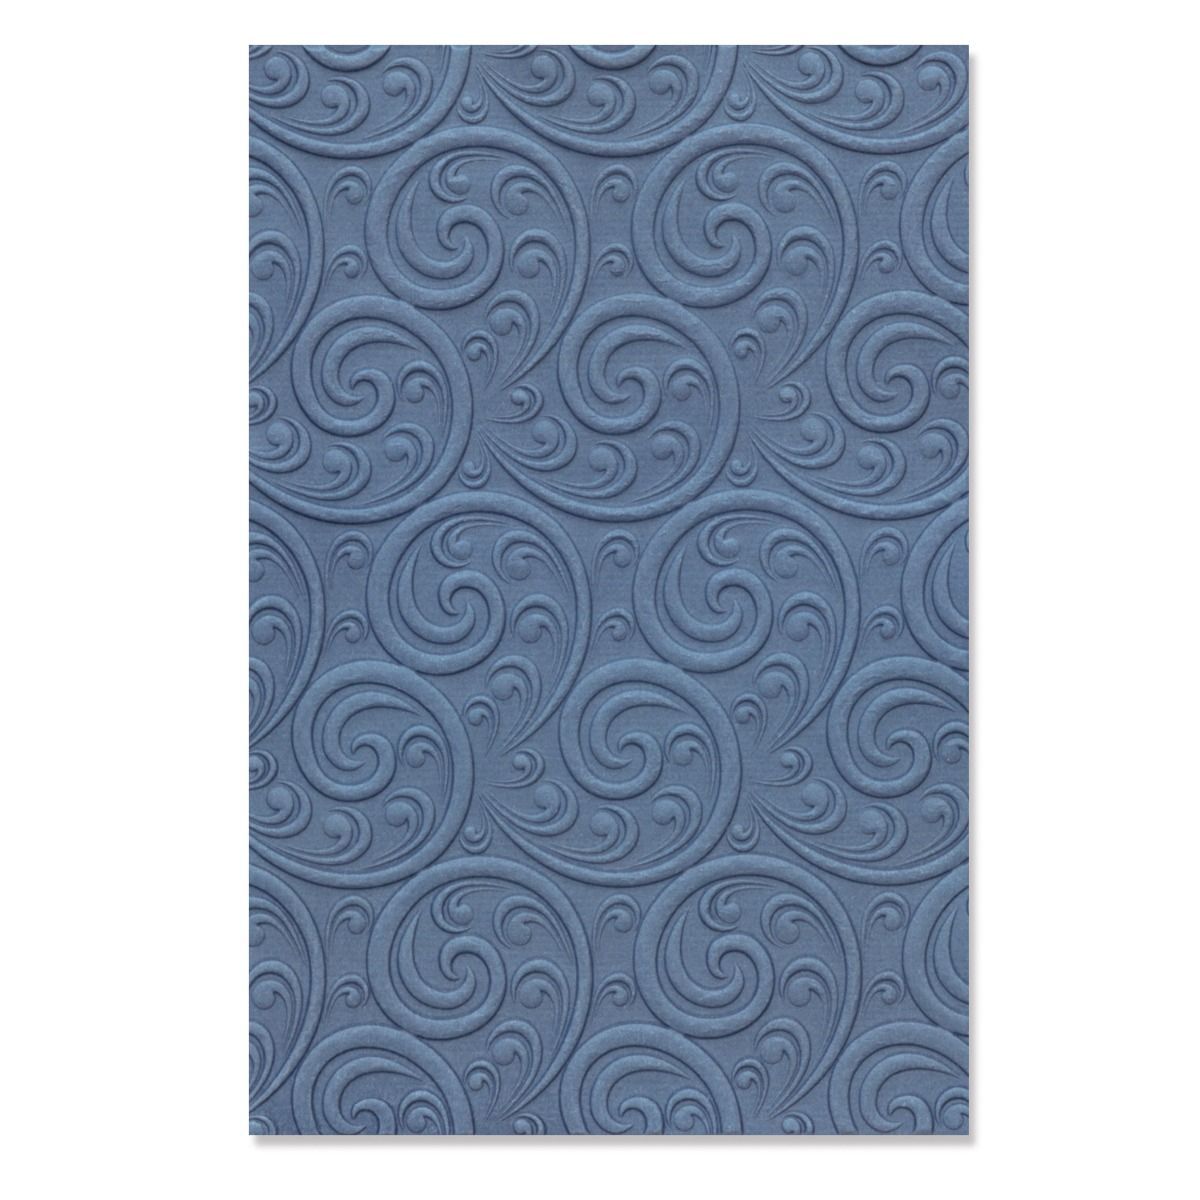 Sizzix 3-D Textured Impressions Embossing Folder - Ornamental Spiral by 666054